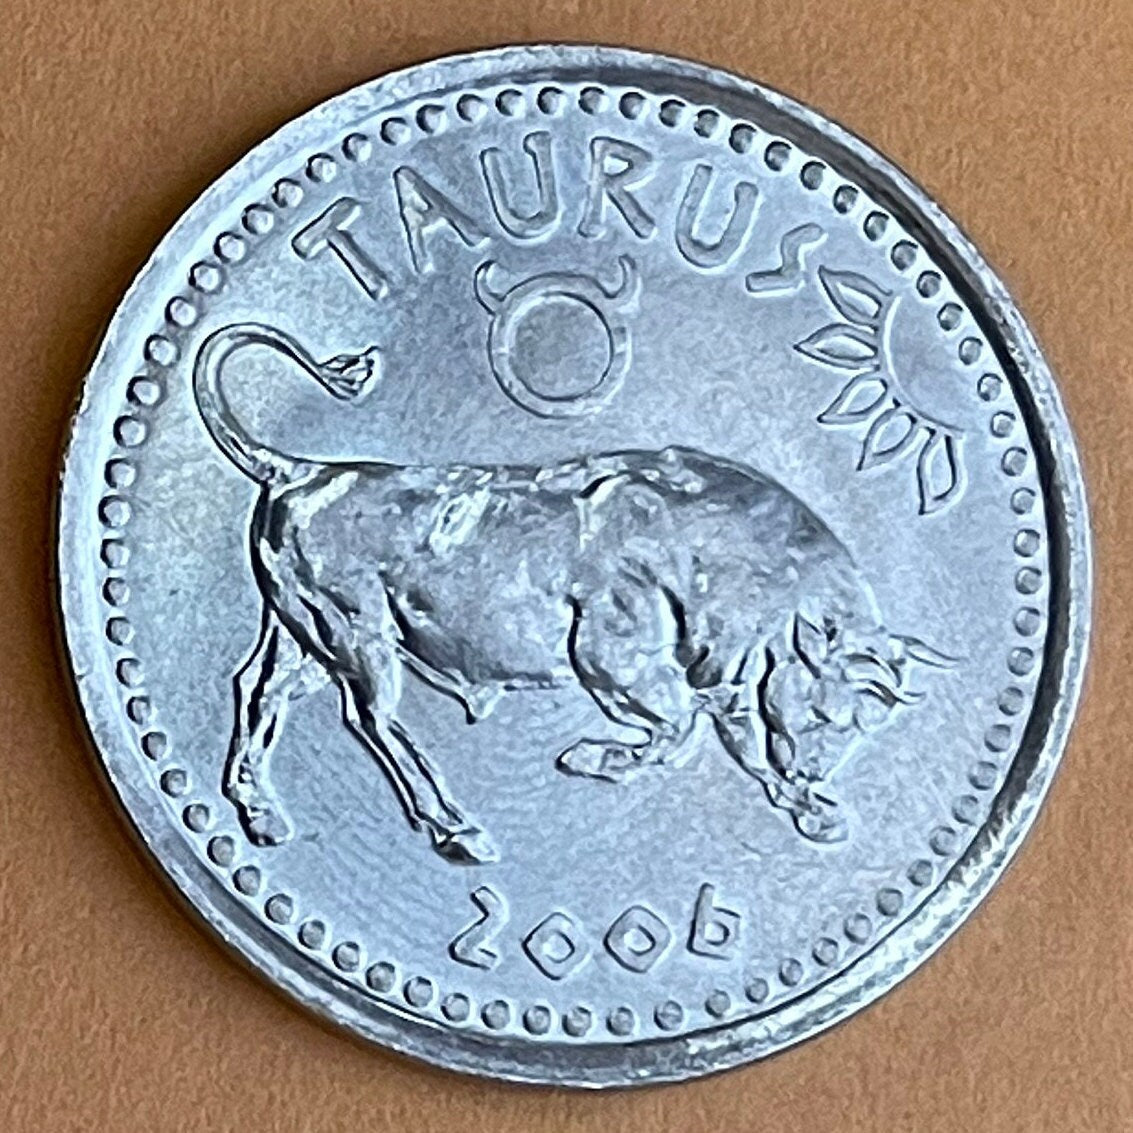 Taurus the Bull 10 Shillings Somaliland Authentic Coin Money for Jewelry and Craft Making (Zodiac Series) (Astrology) Bull of Heaven